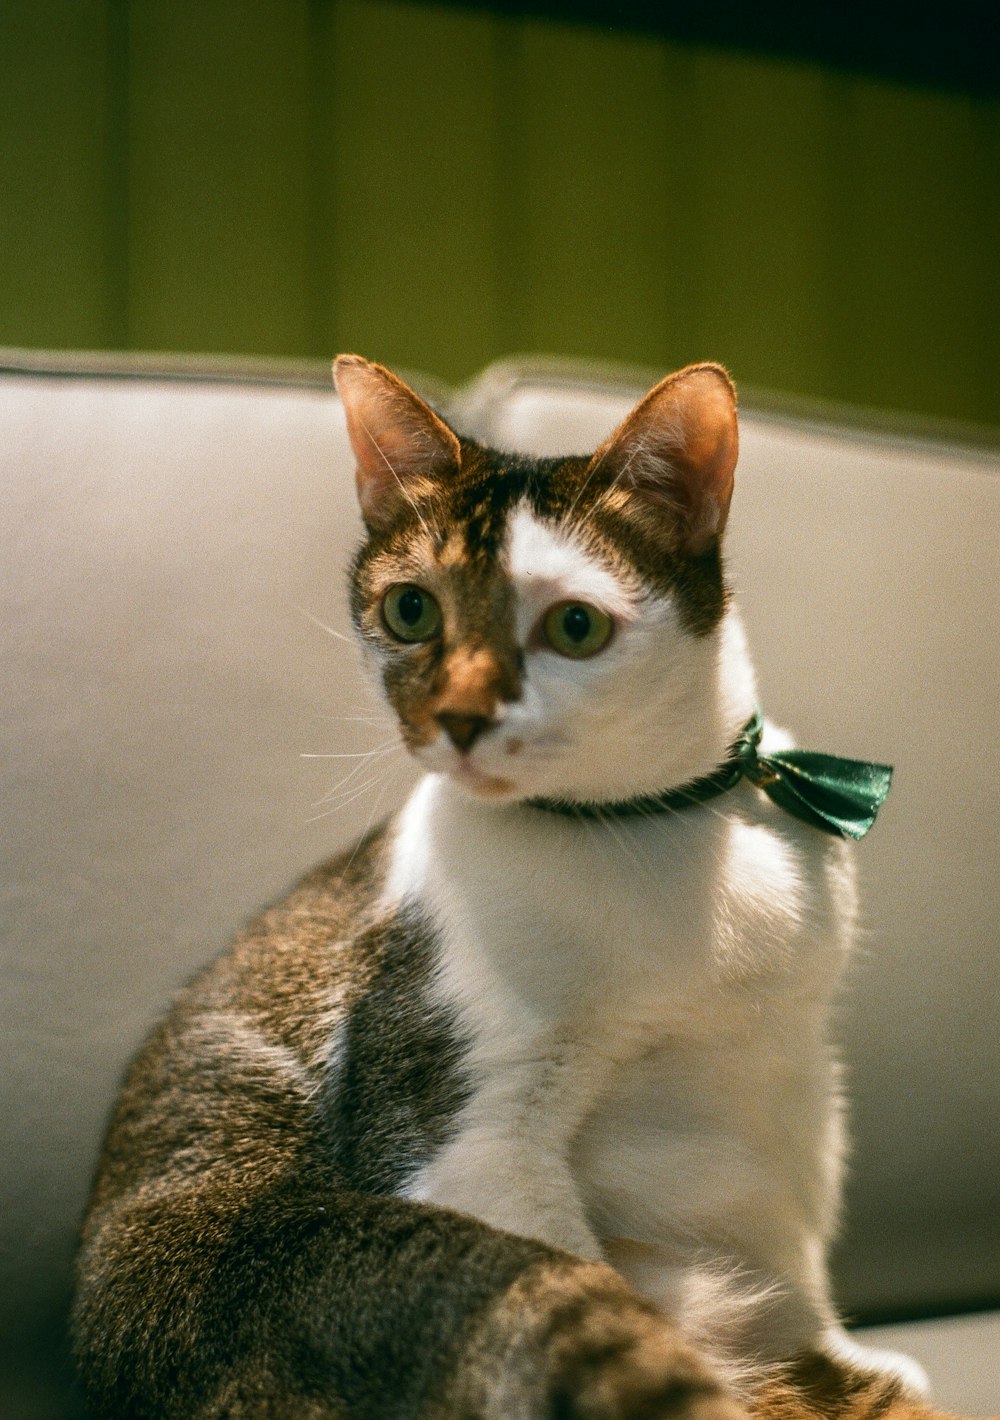 a cat sitting on a couch wearing a green bow tie